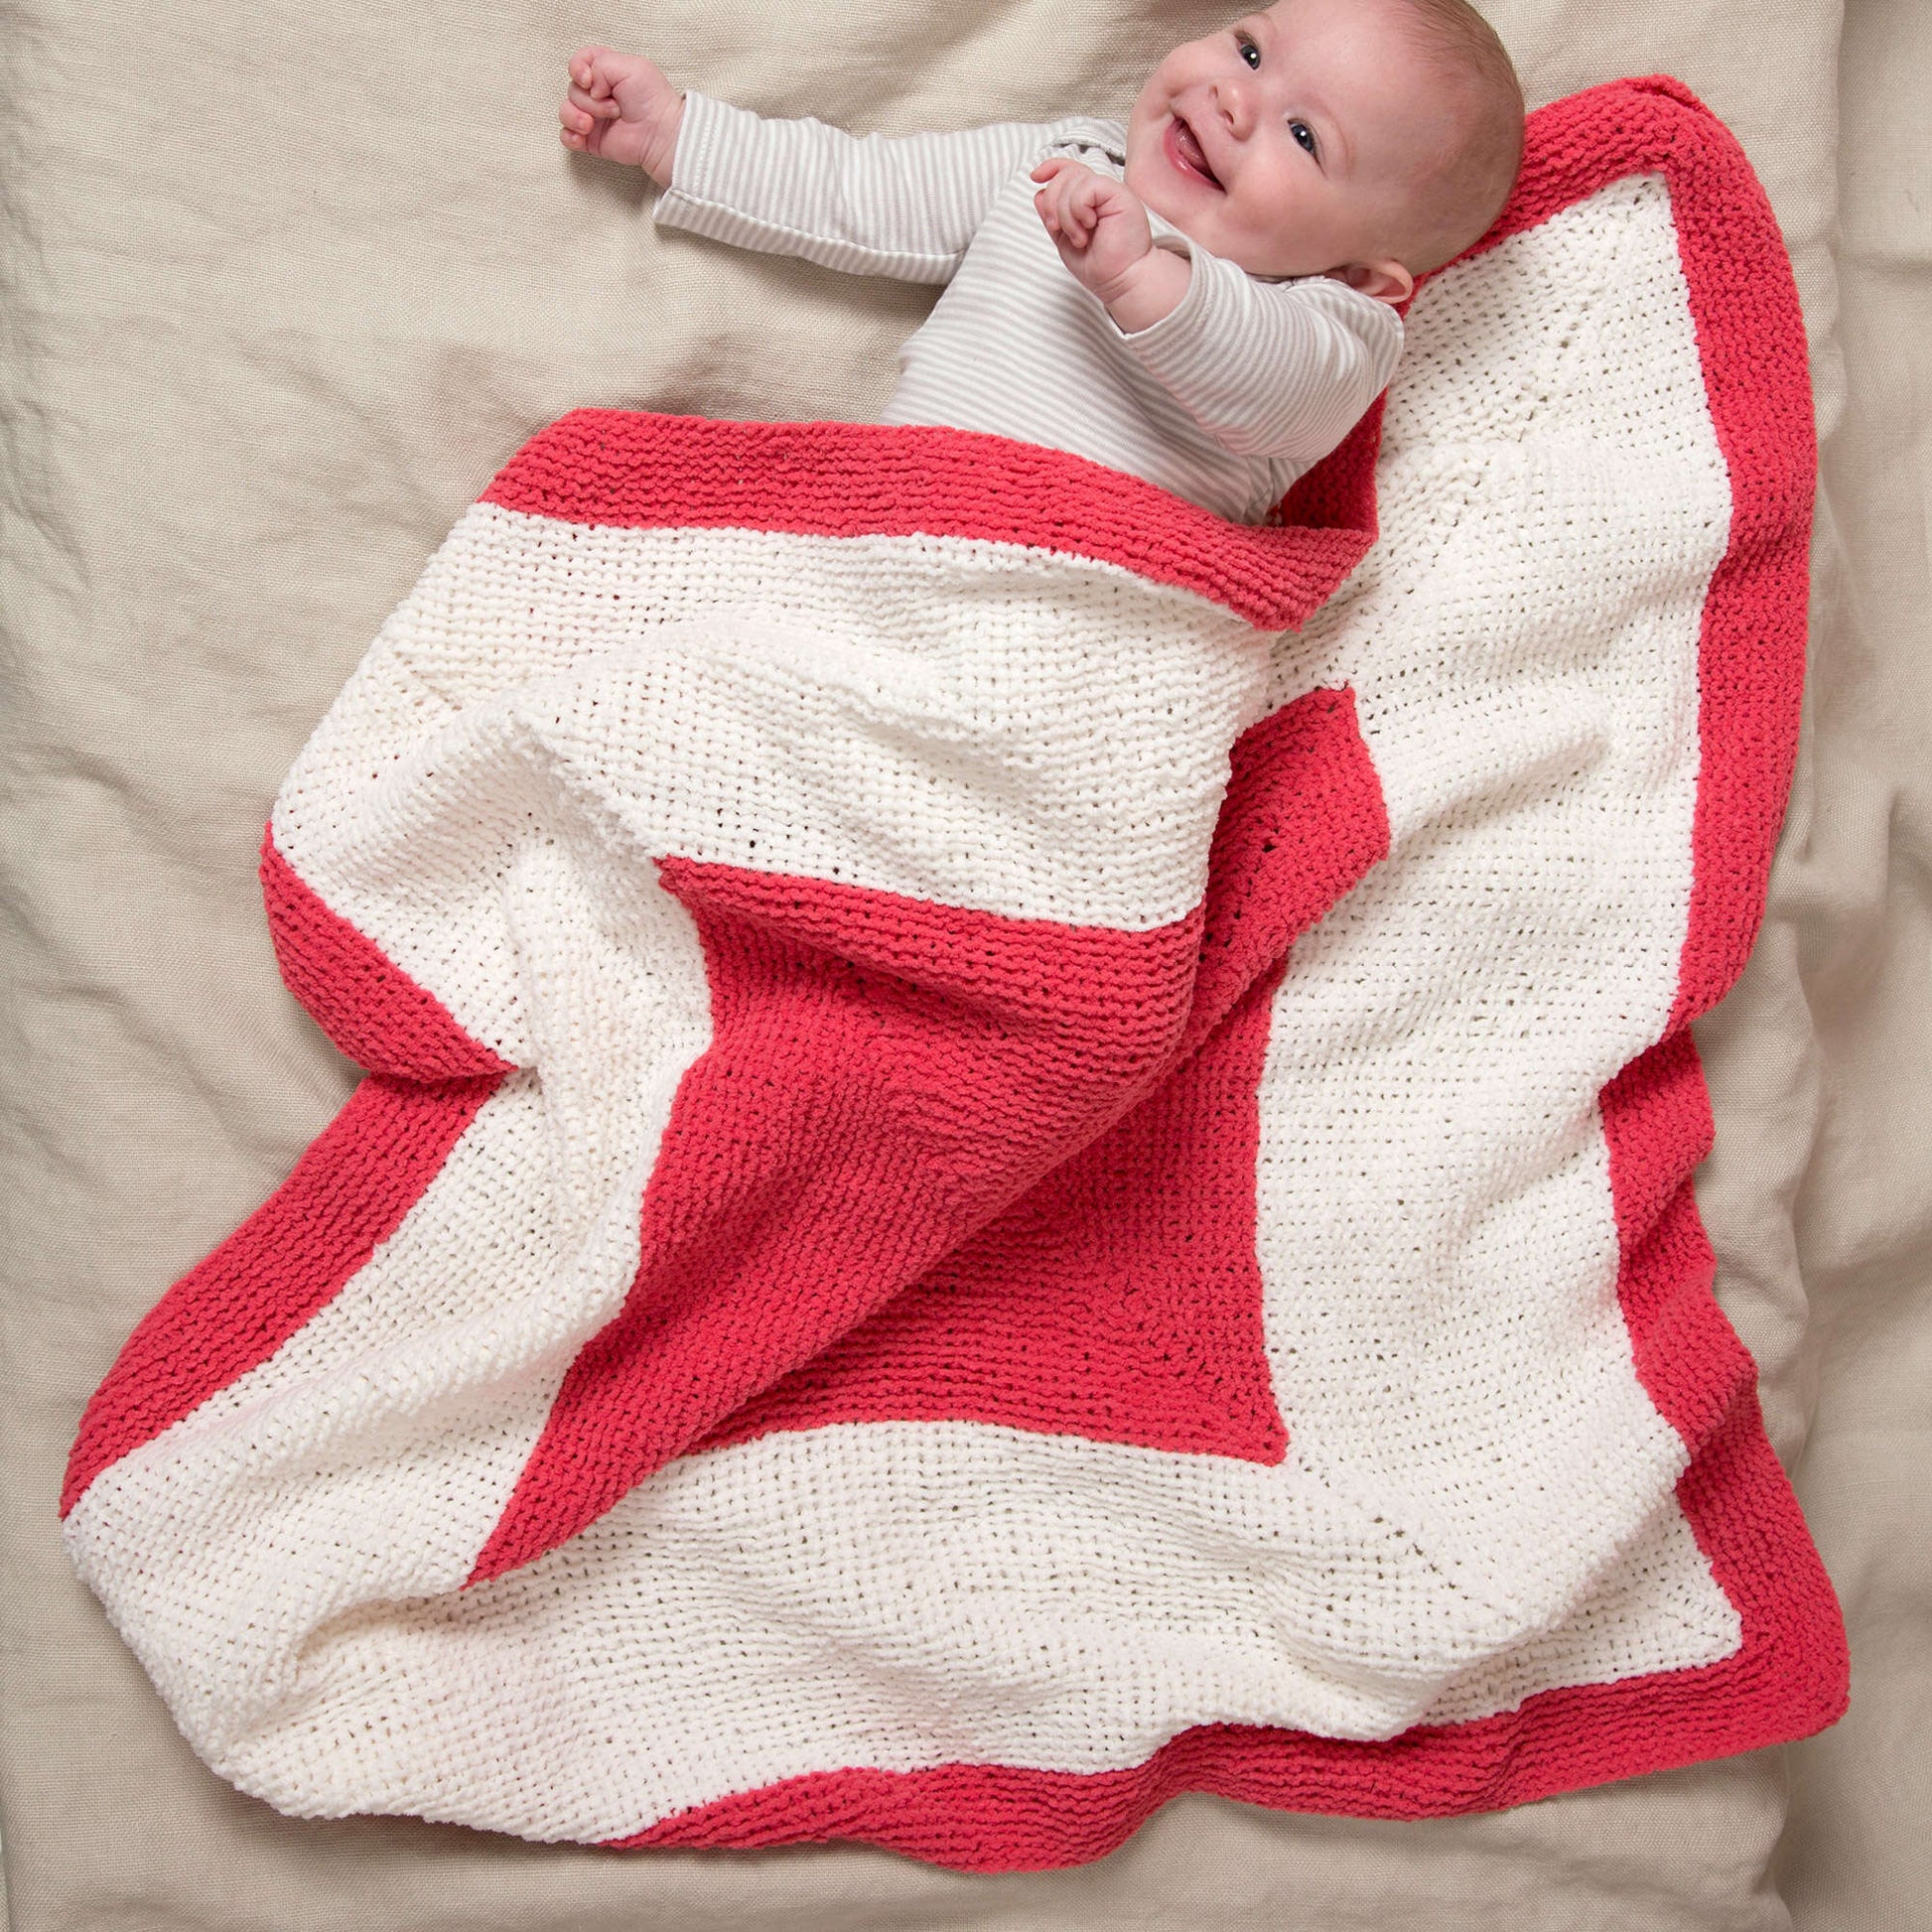 Free Red Heart Square On Square Knit Baby Blanket Pattern